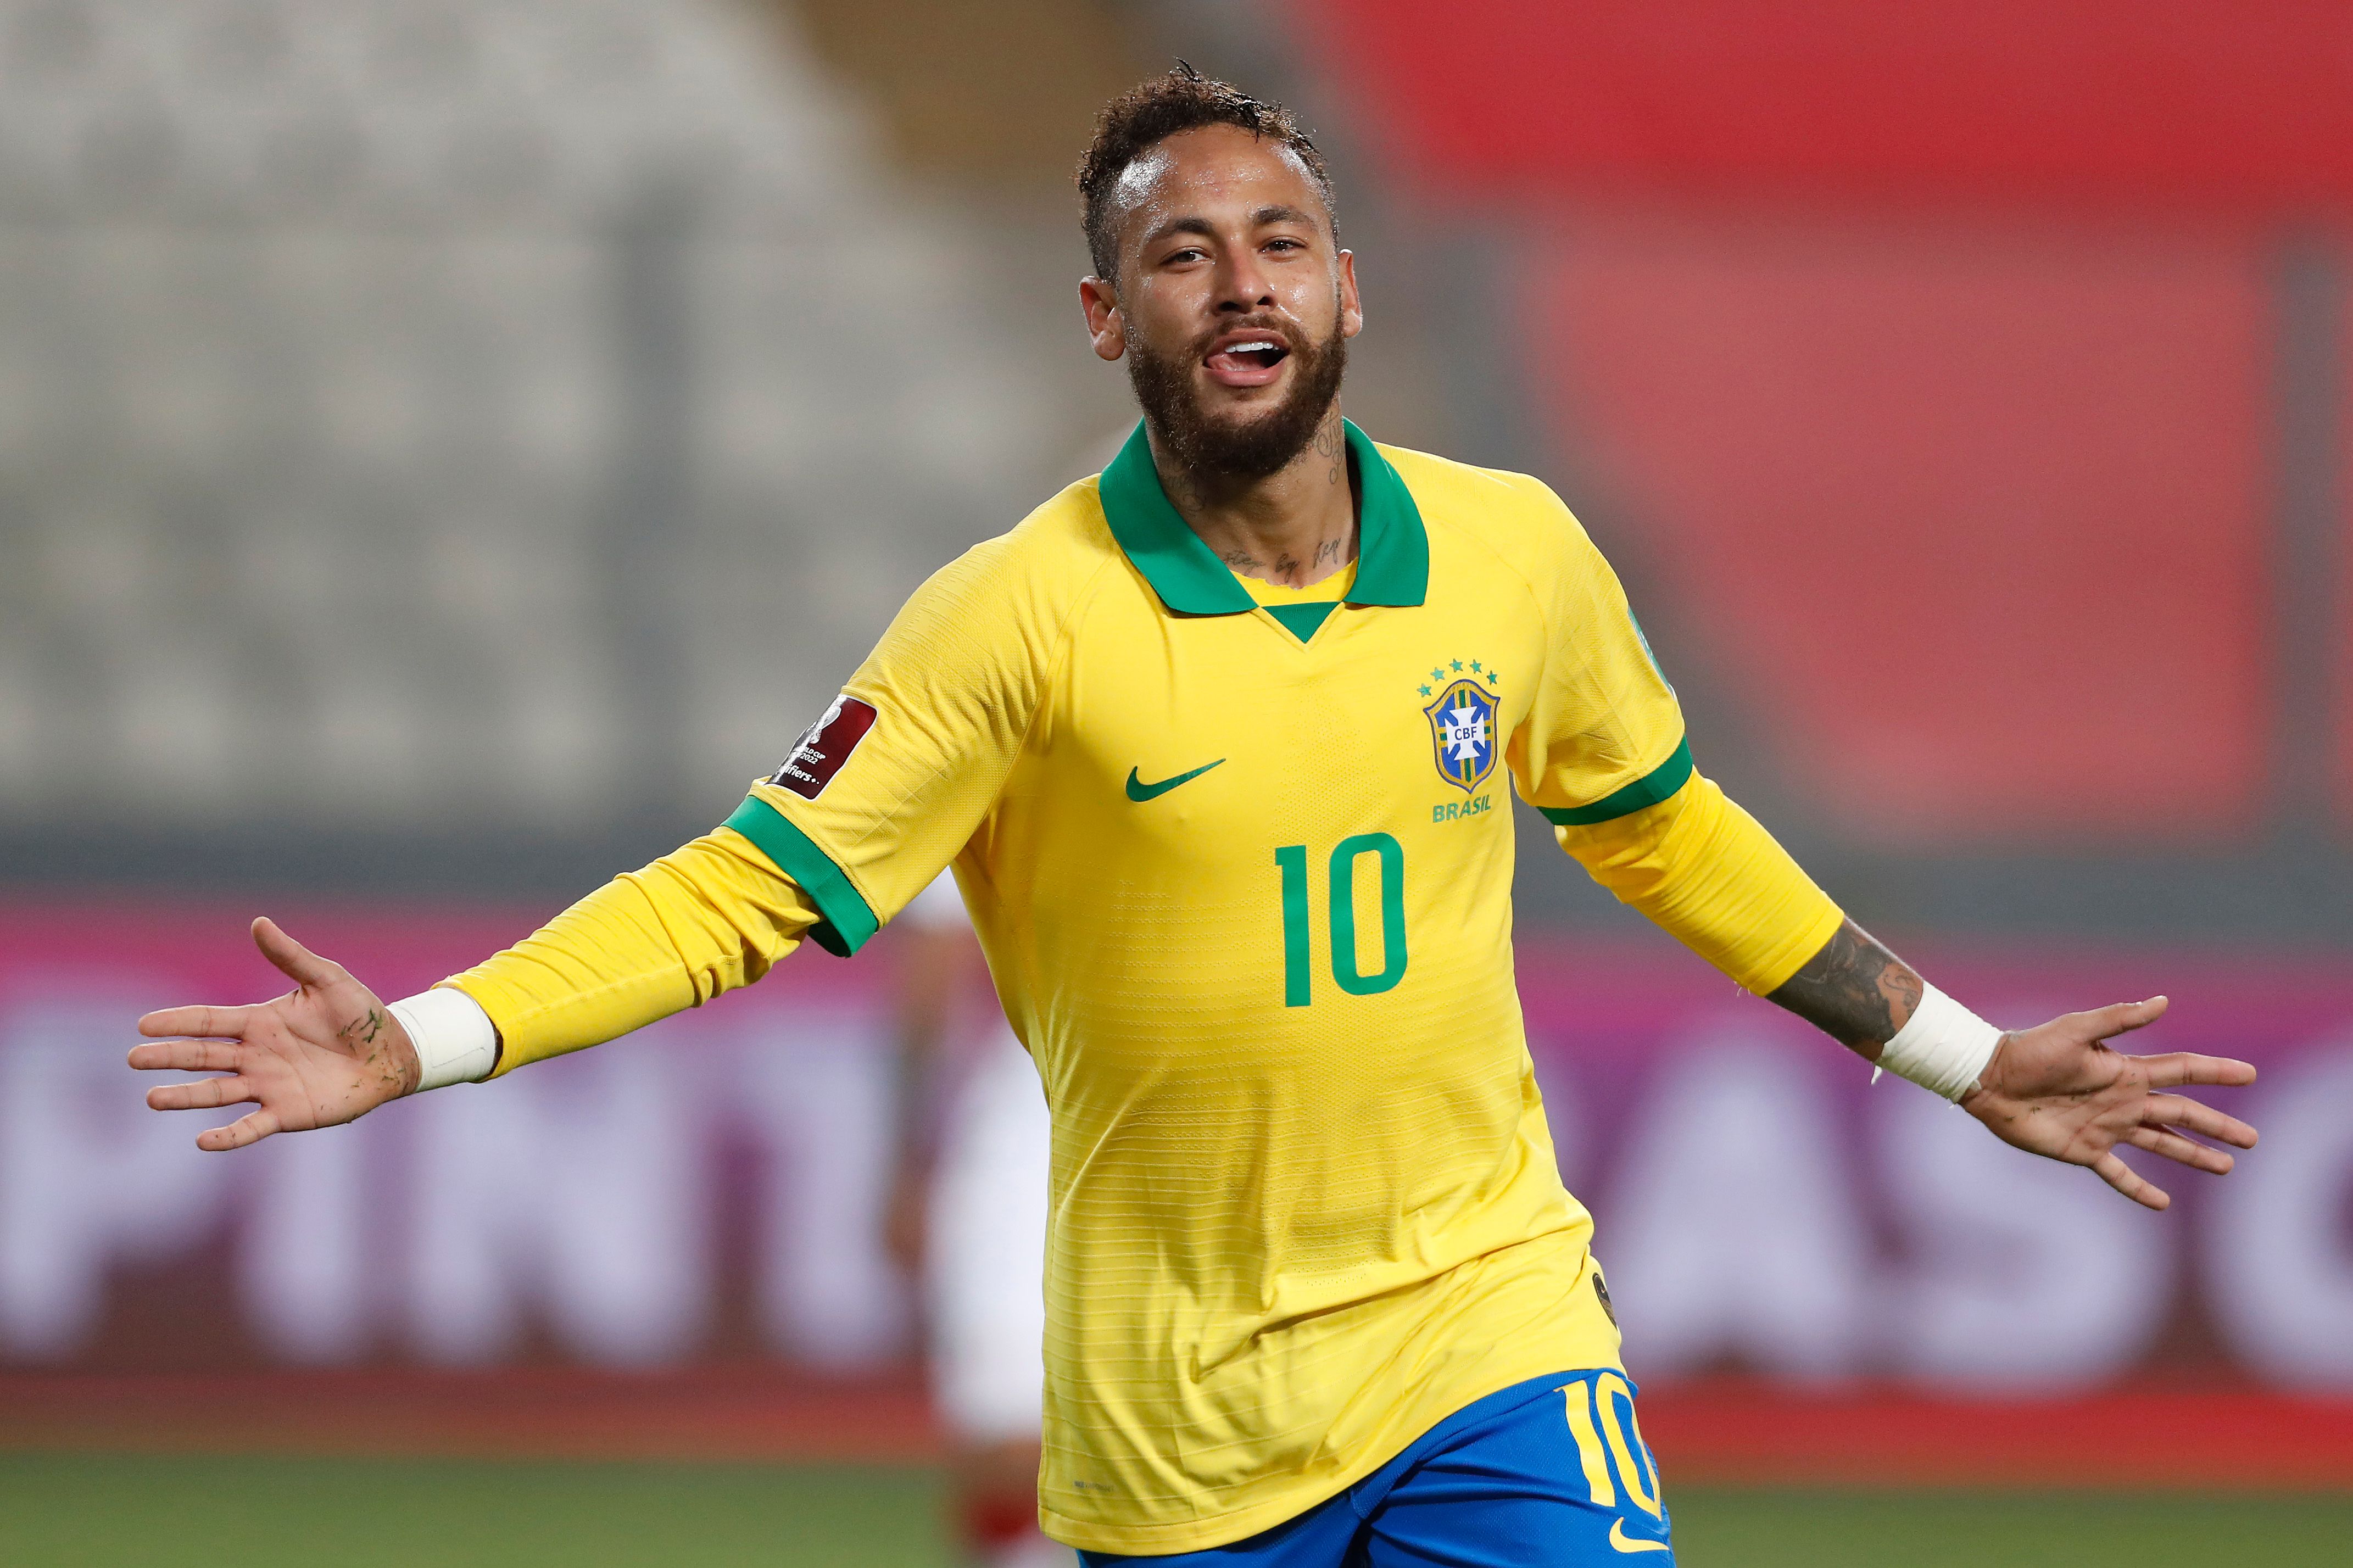 Neymar Jr How many goals does the Brazilian have at World Cups?